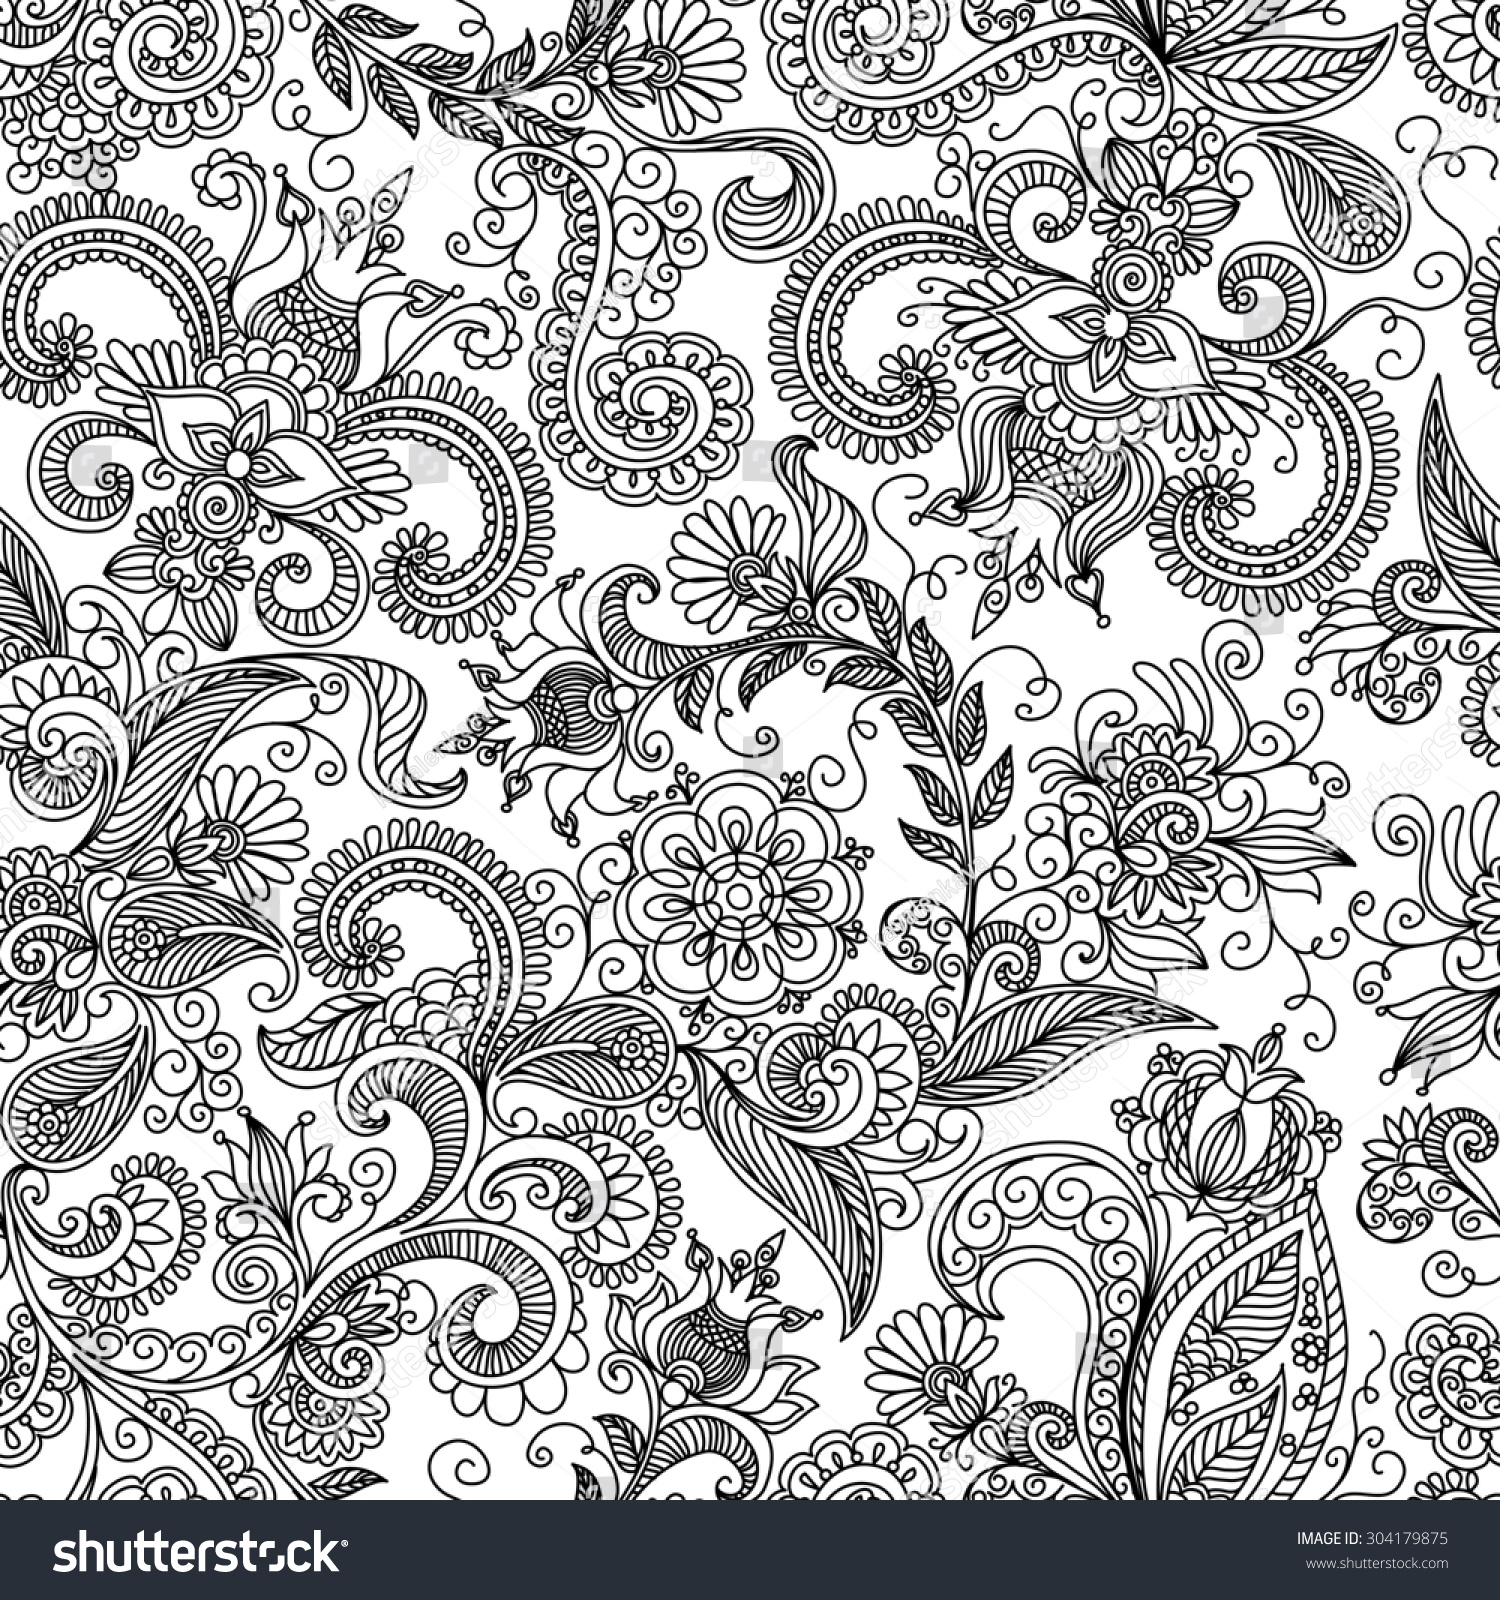 Seamless Black And White Pattern Of Spirals, Swirls, Doodles Stock ...